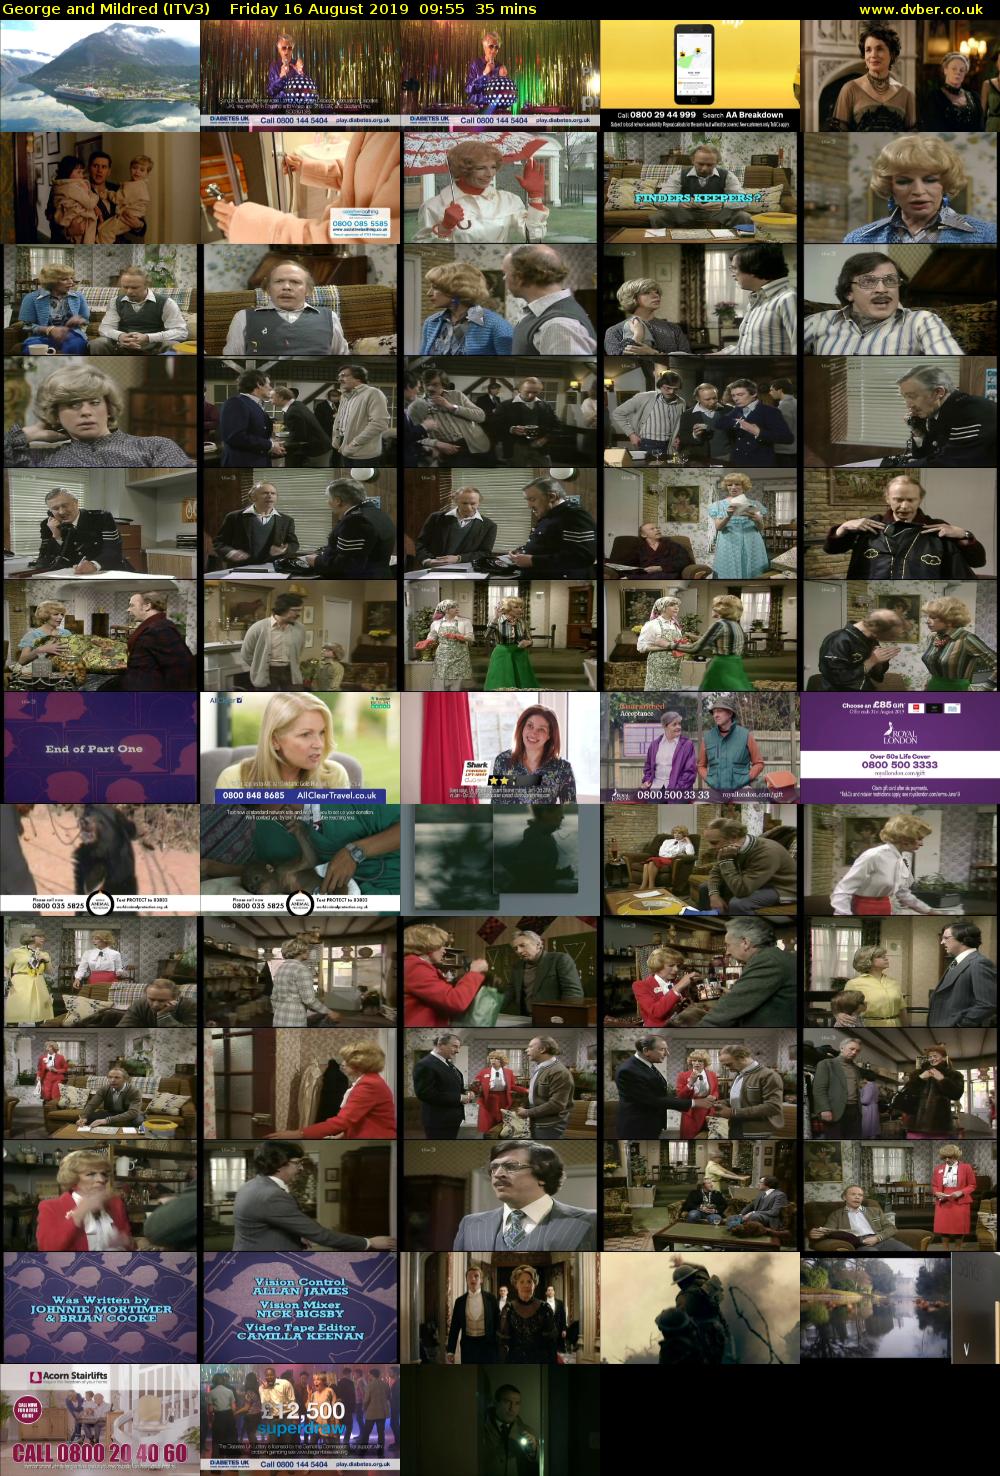 George and Mildred (ITV3) Friday 16 August 2019 09:55 - 10:30